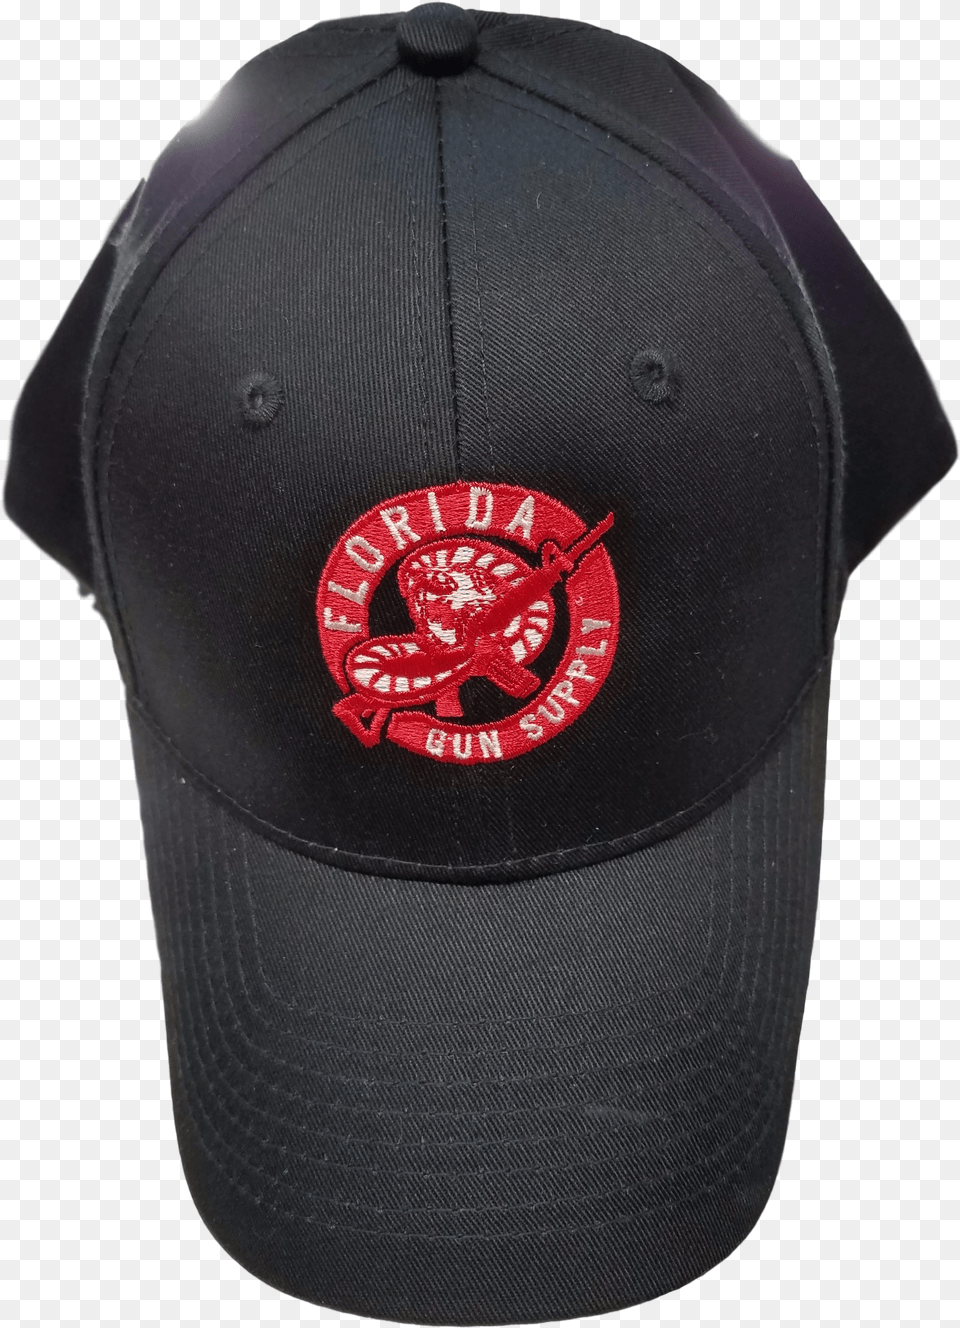 Embroidered Hats For Baseball, Baseball Cap, Cap, Clothing, Hat Free Png